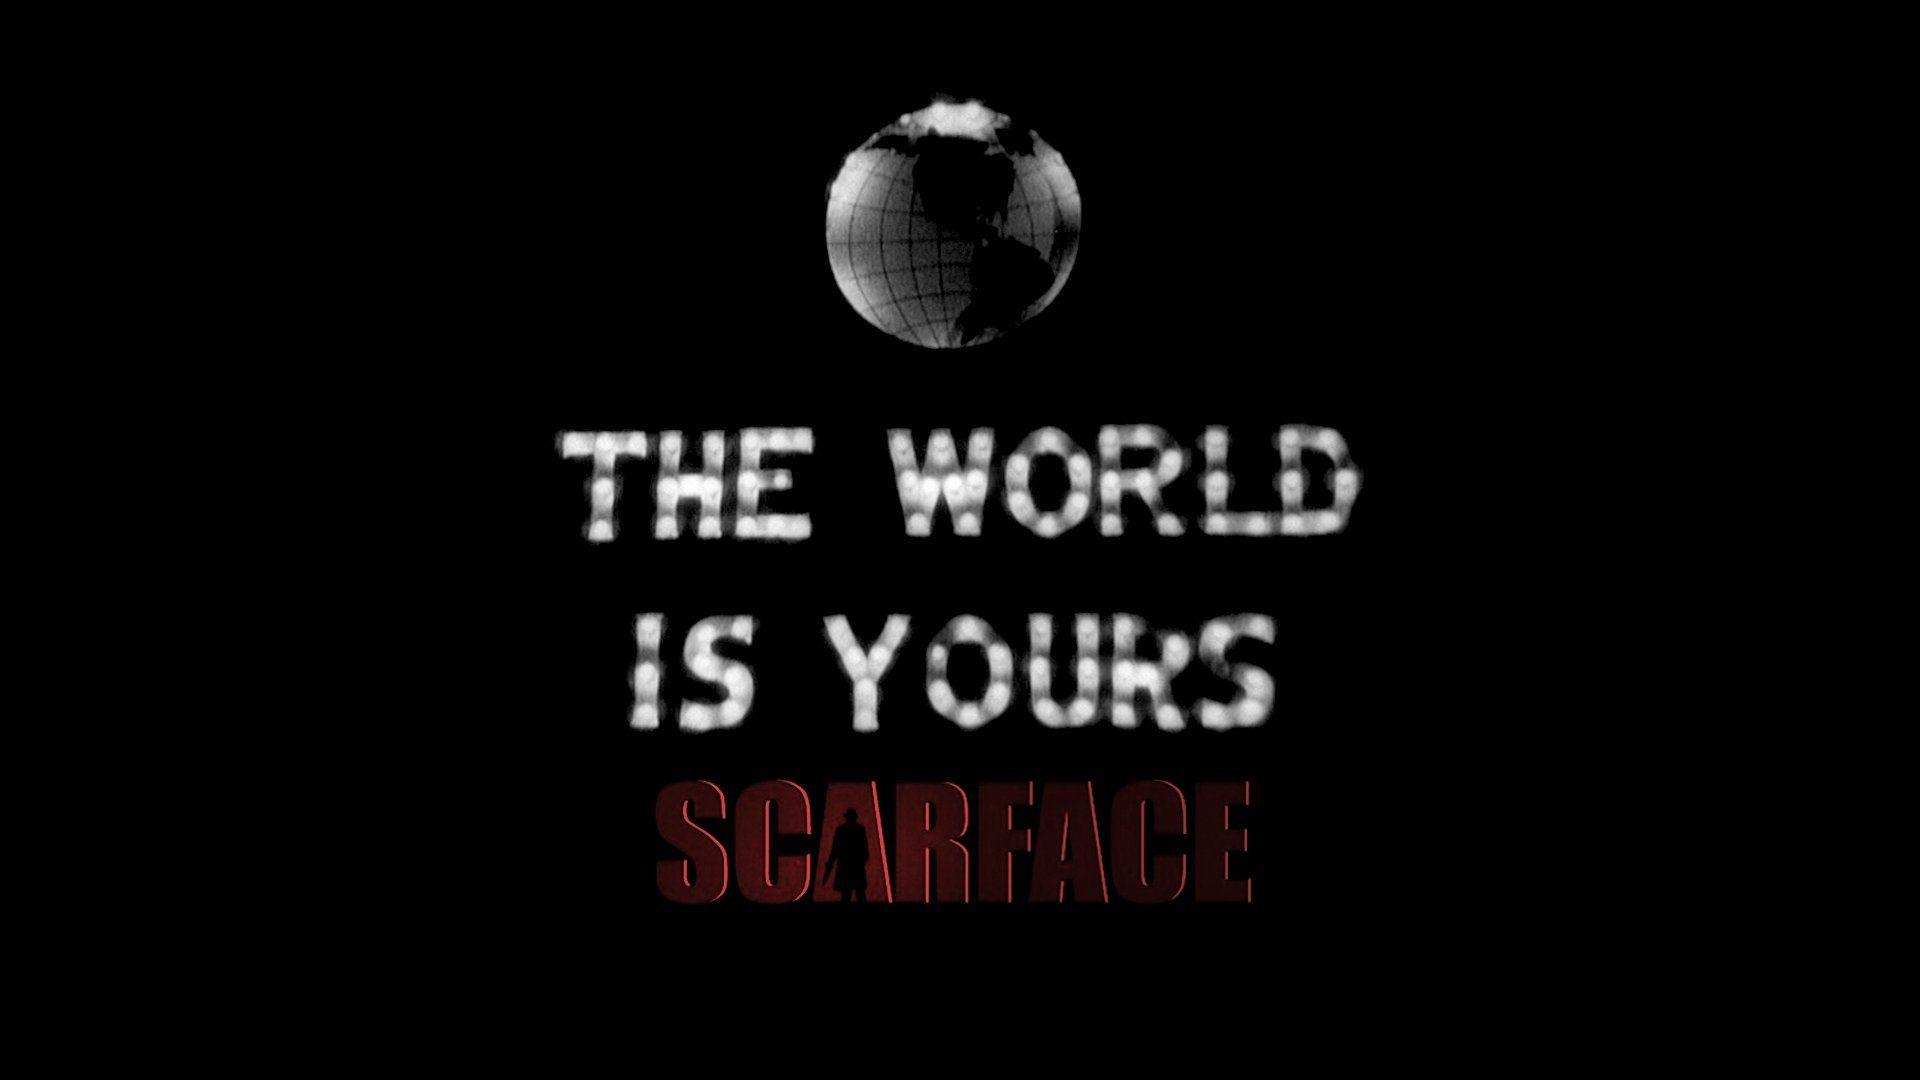 DA58: Scarface The World Is Yours Wallpaper, Scarface The World